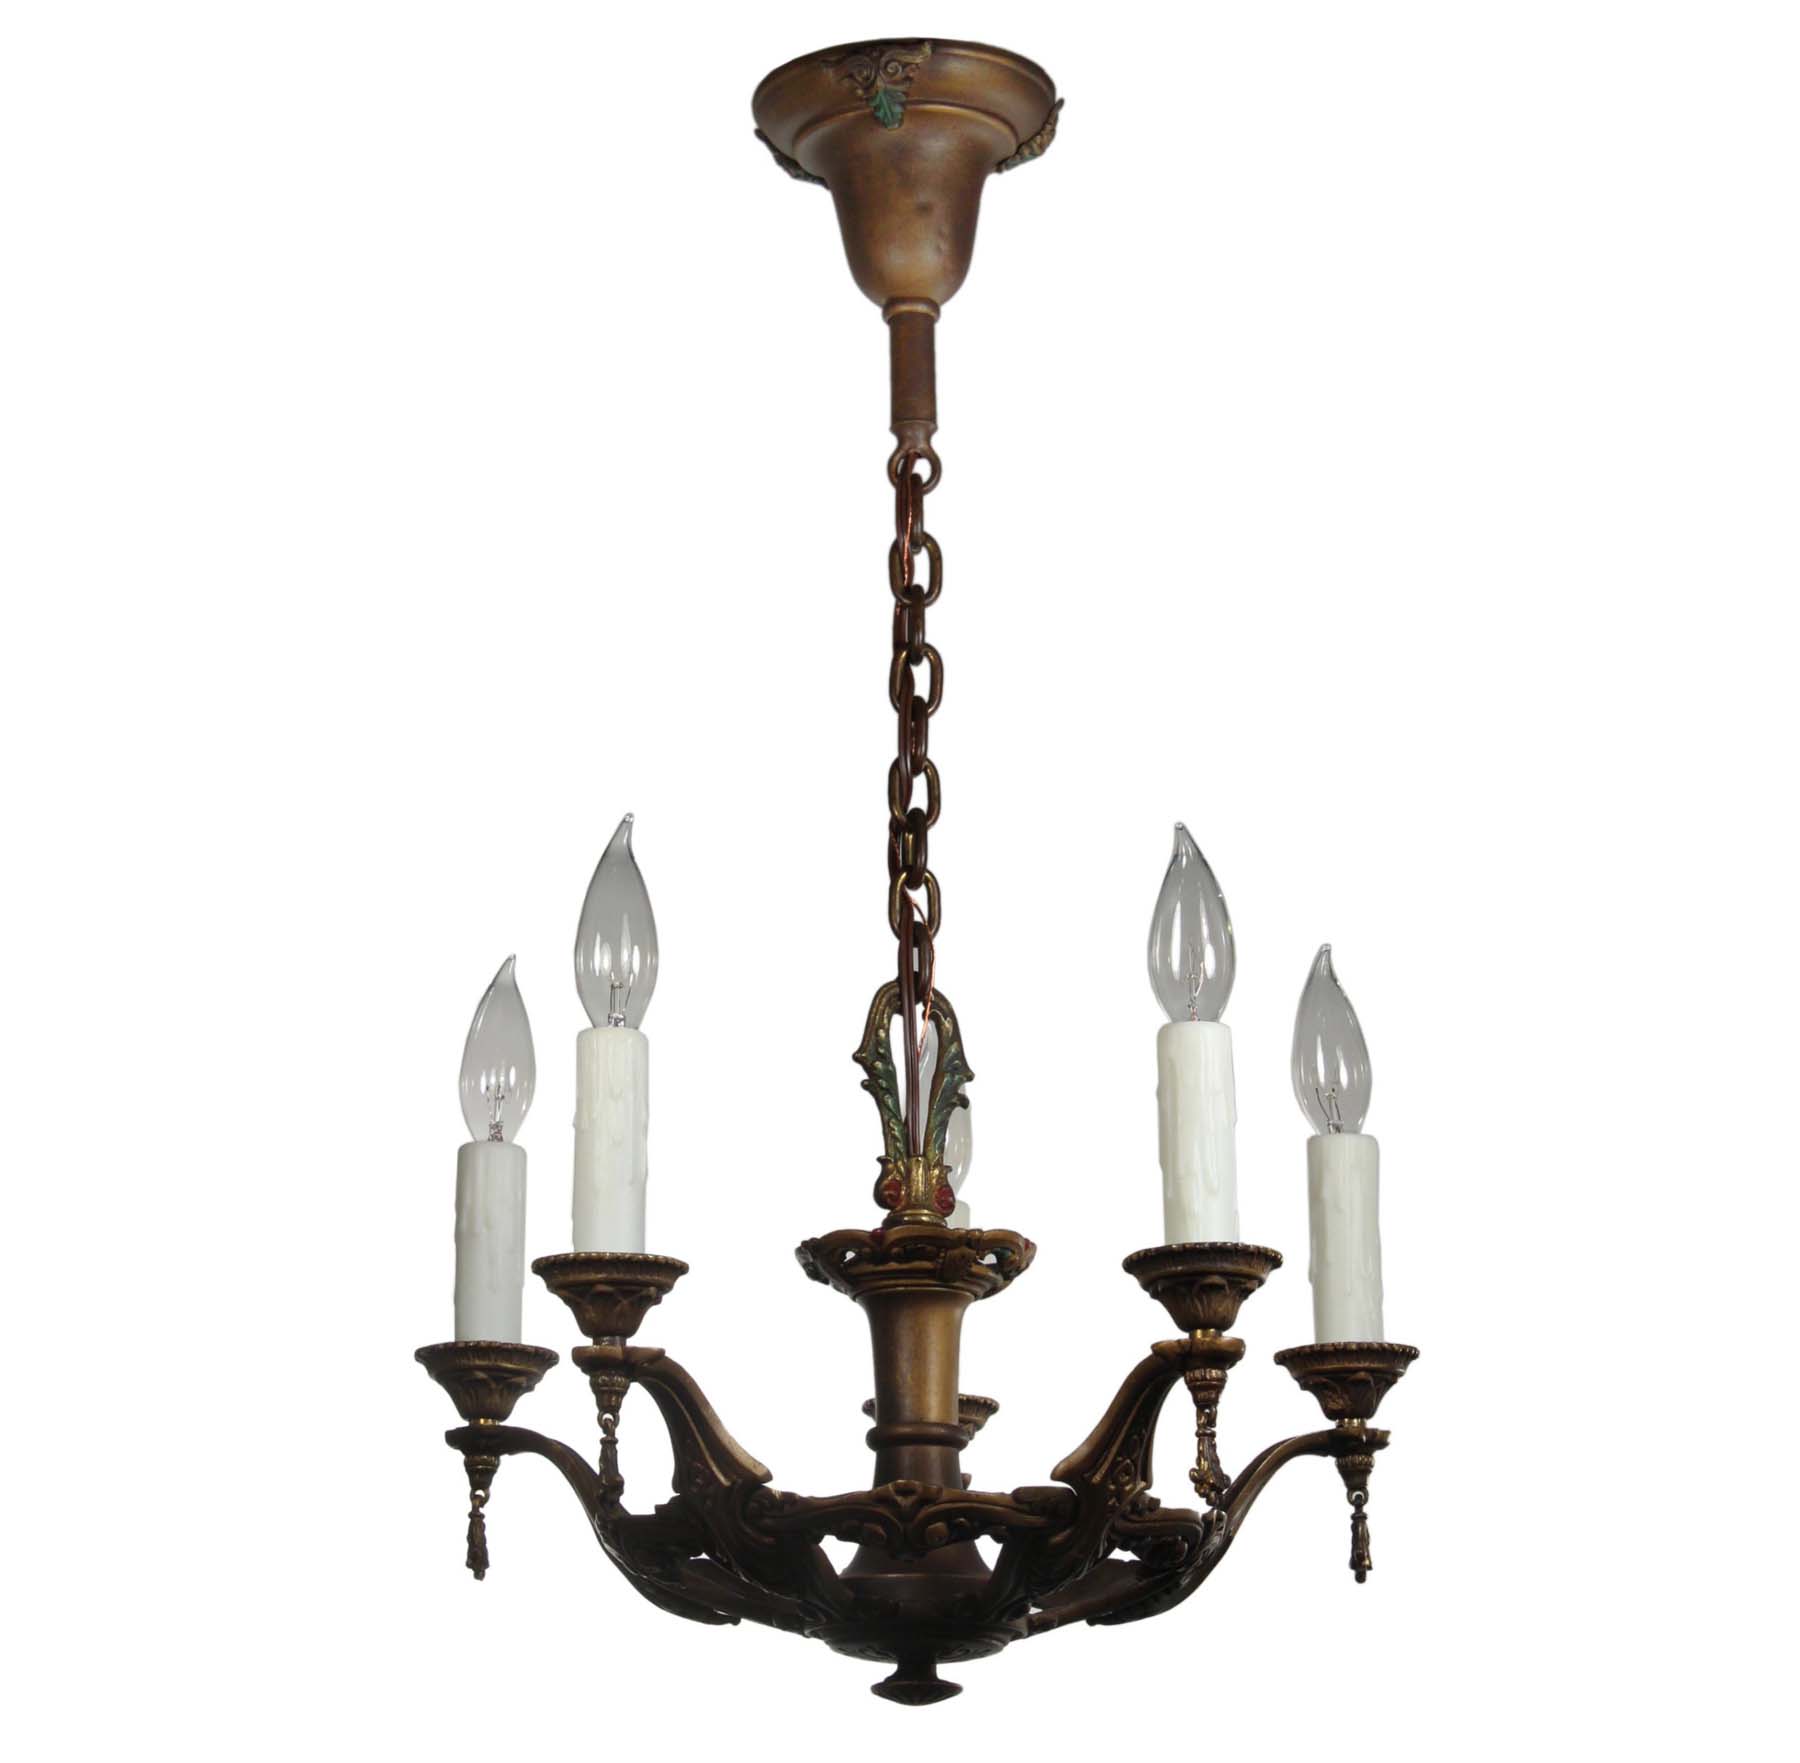 SOLD Antique Chandelier with Original Polychrome Finish, Signed Radiant-68074